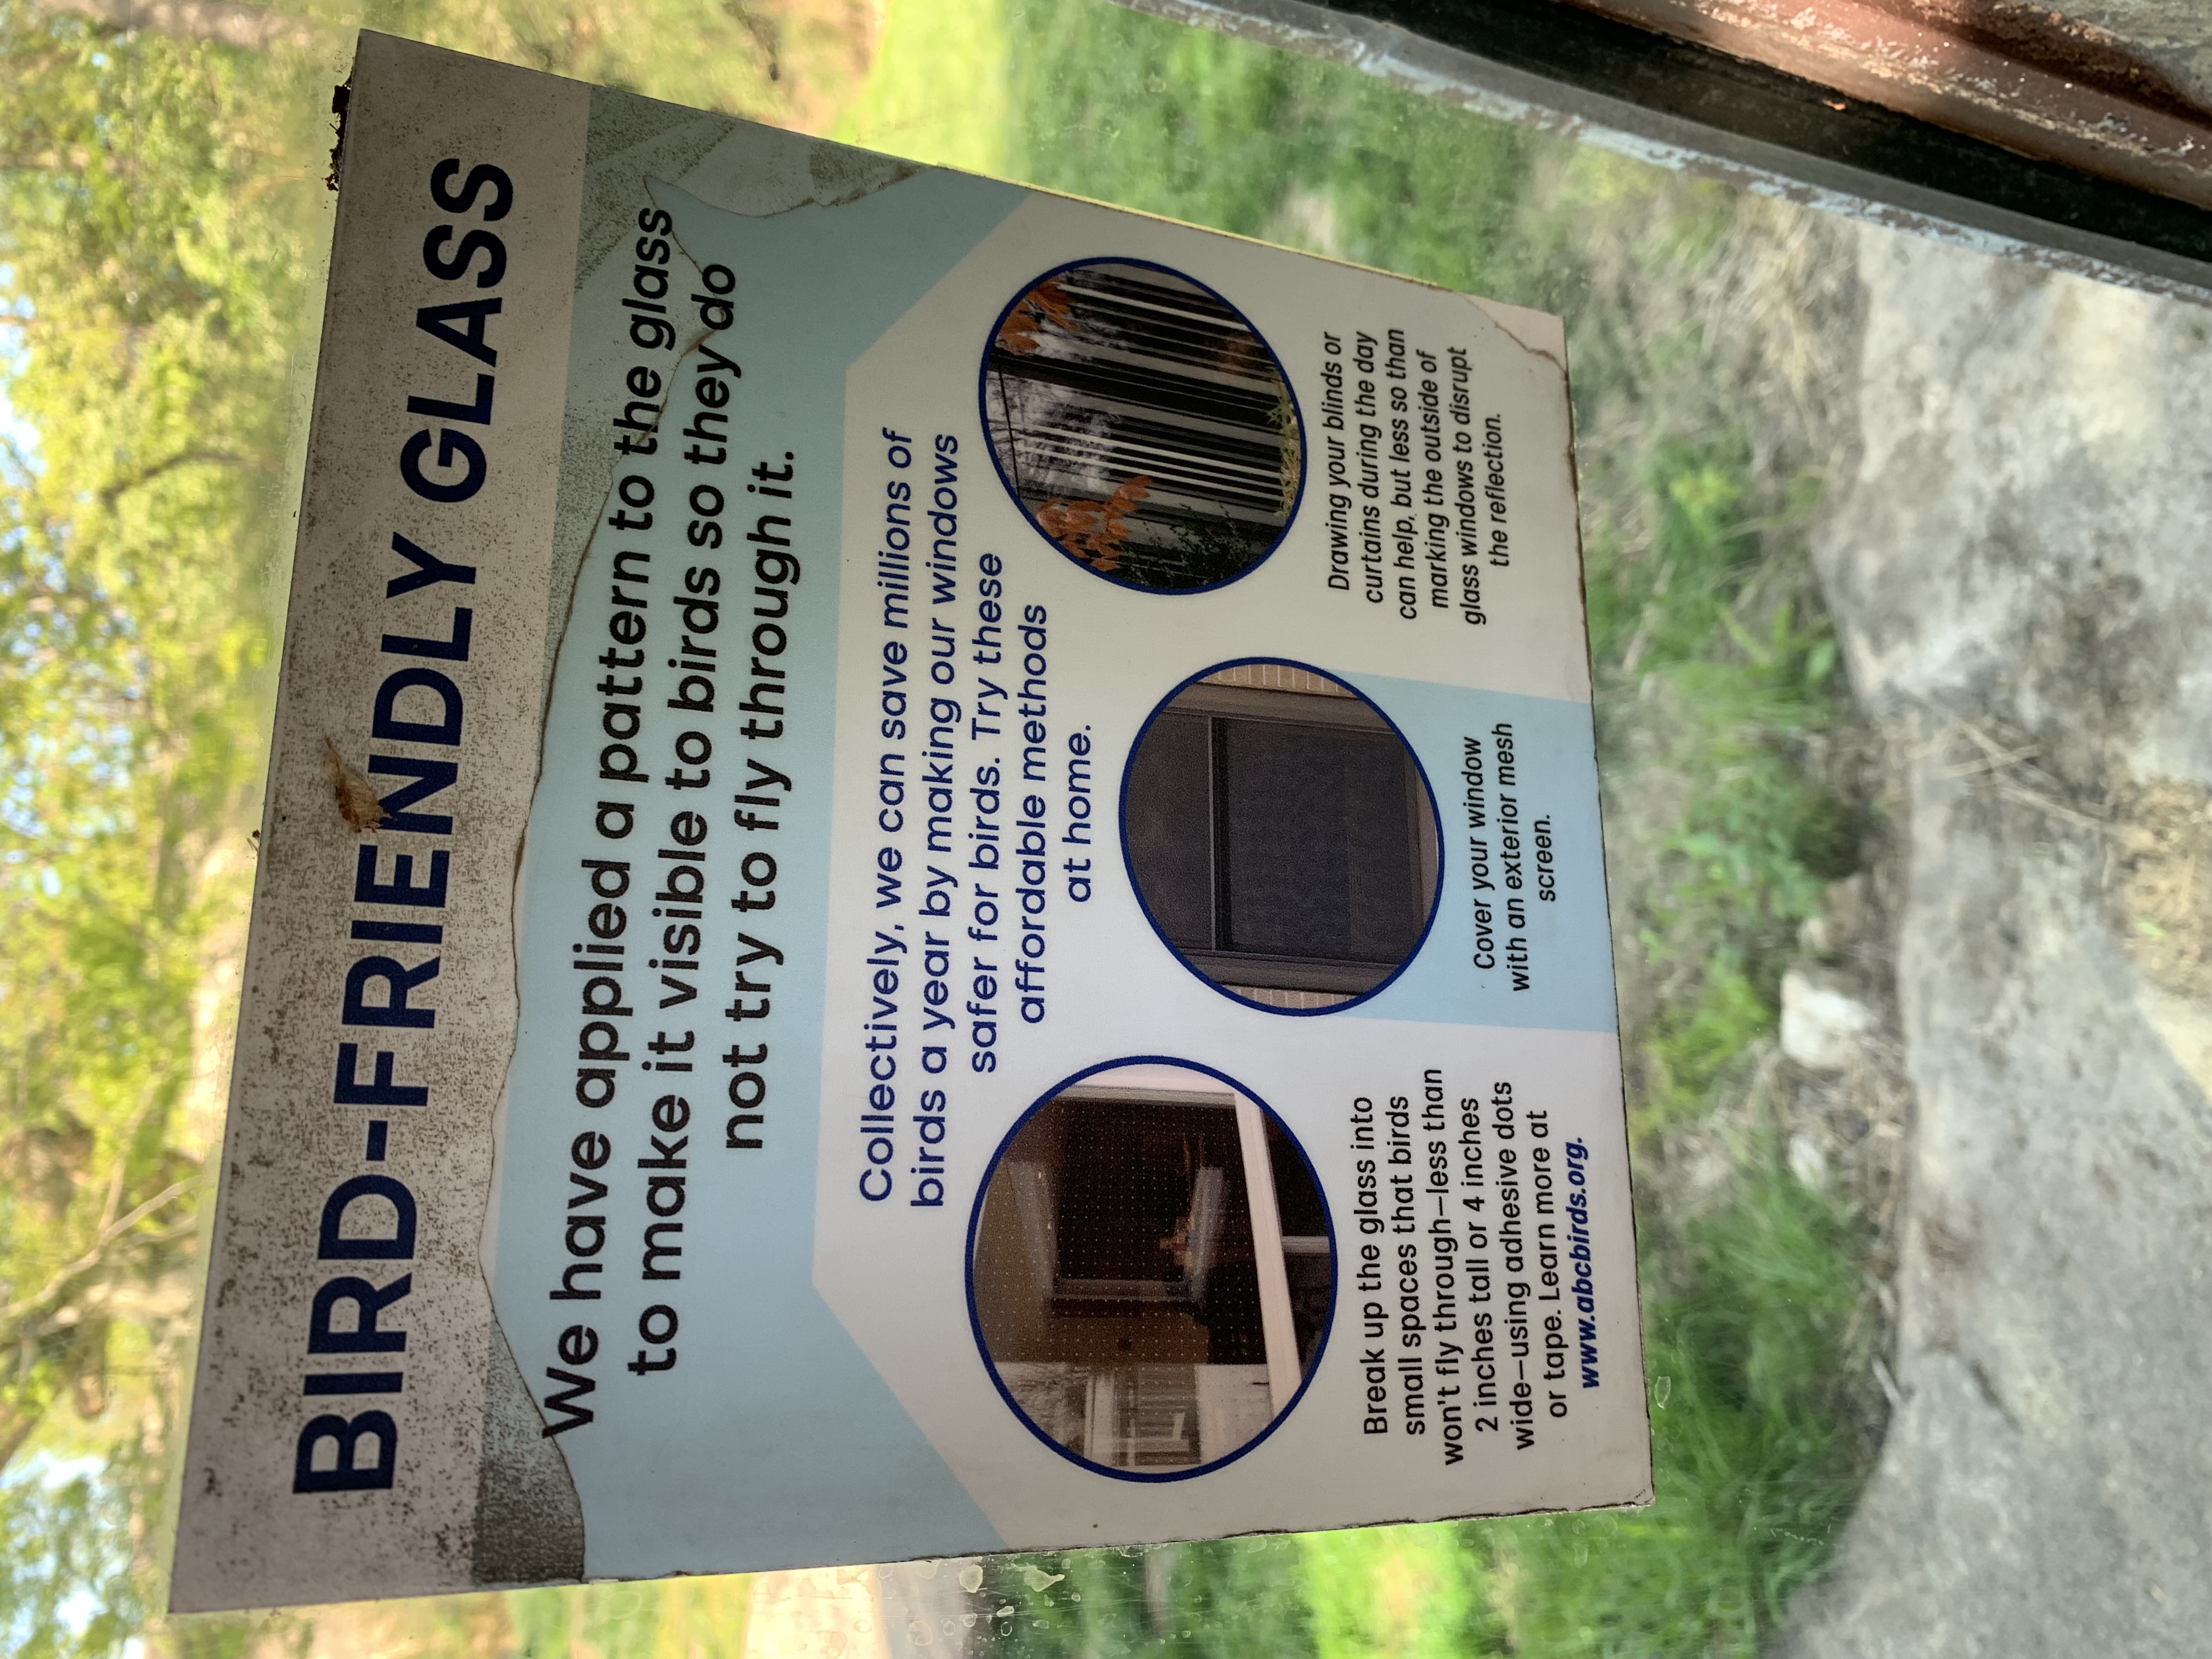 A sign explains: Bird-friendly glass. We have applied a pattern to the glass to make it visible to birds so they do not try to fly through it.